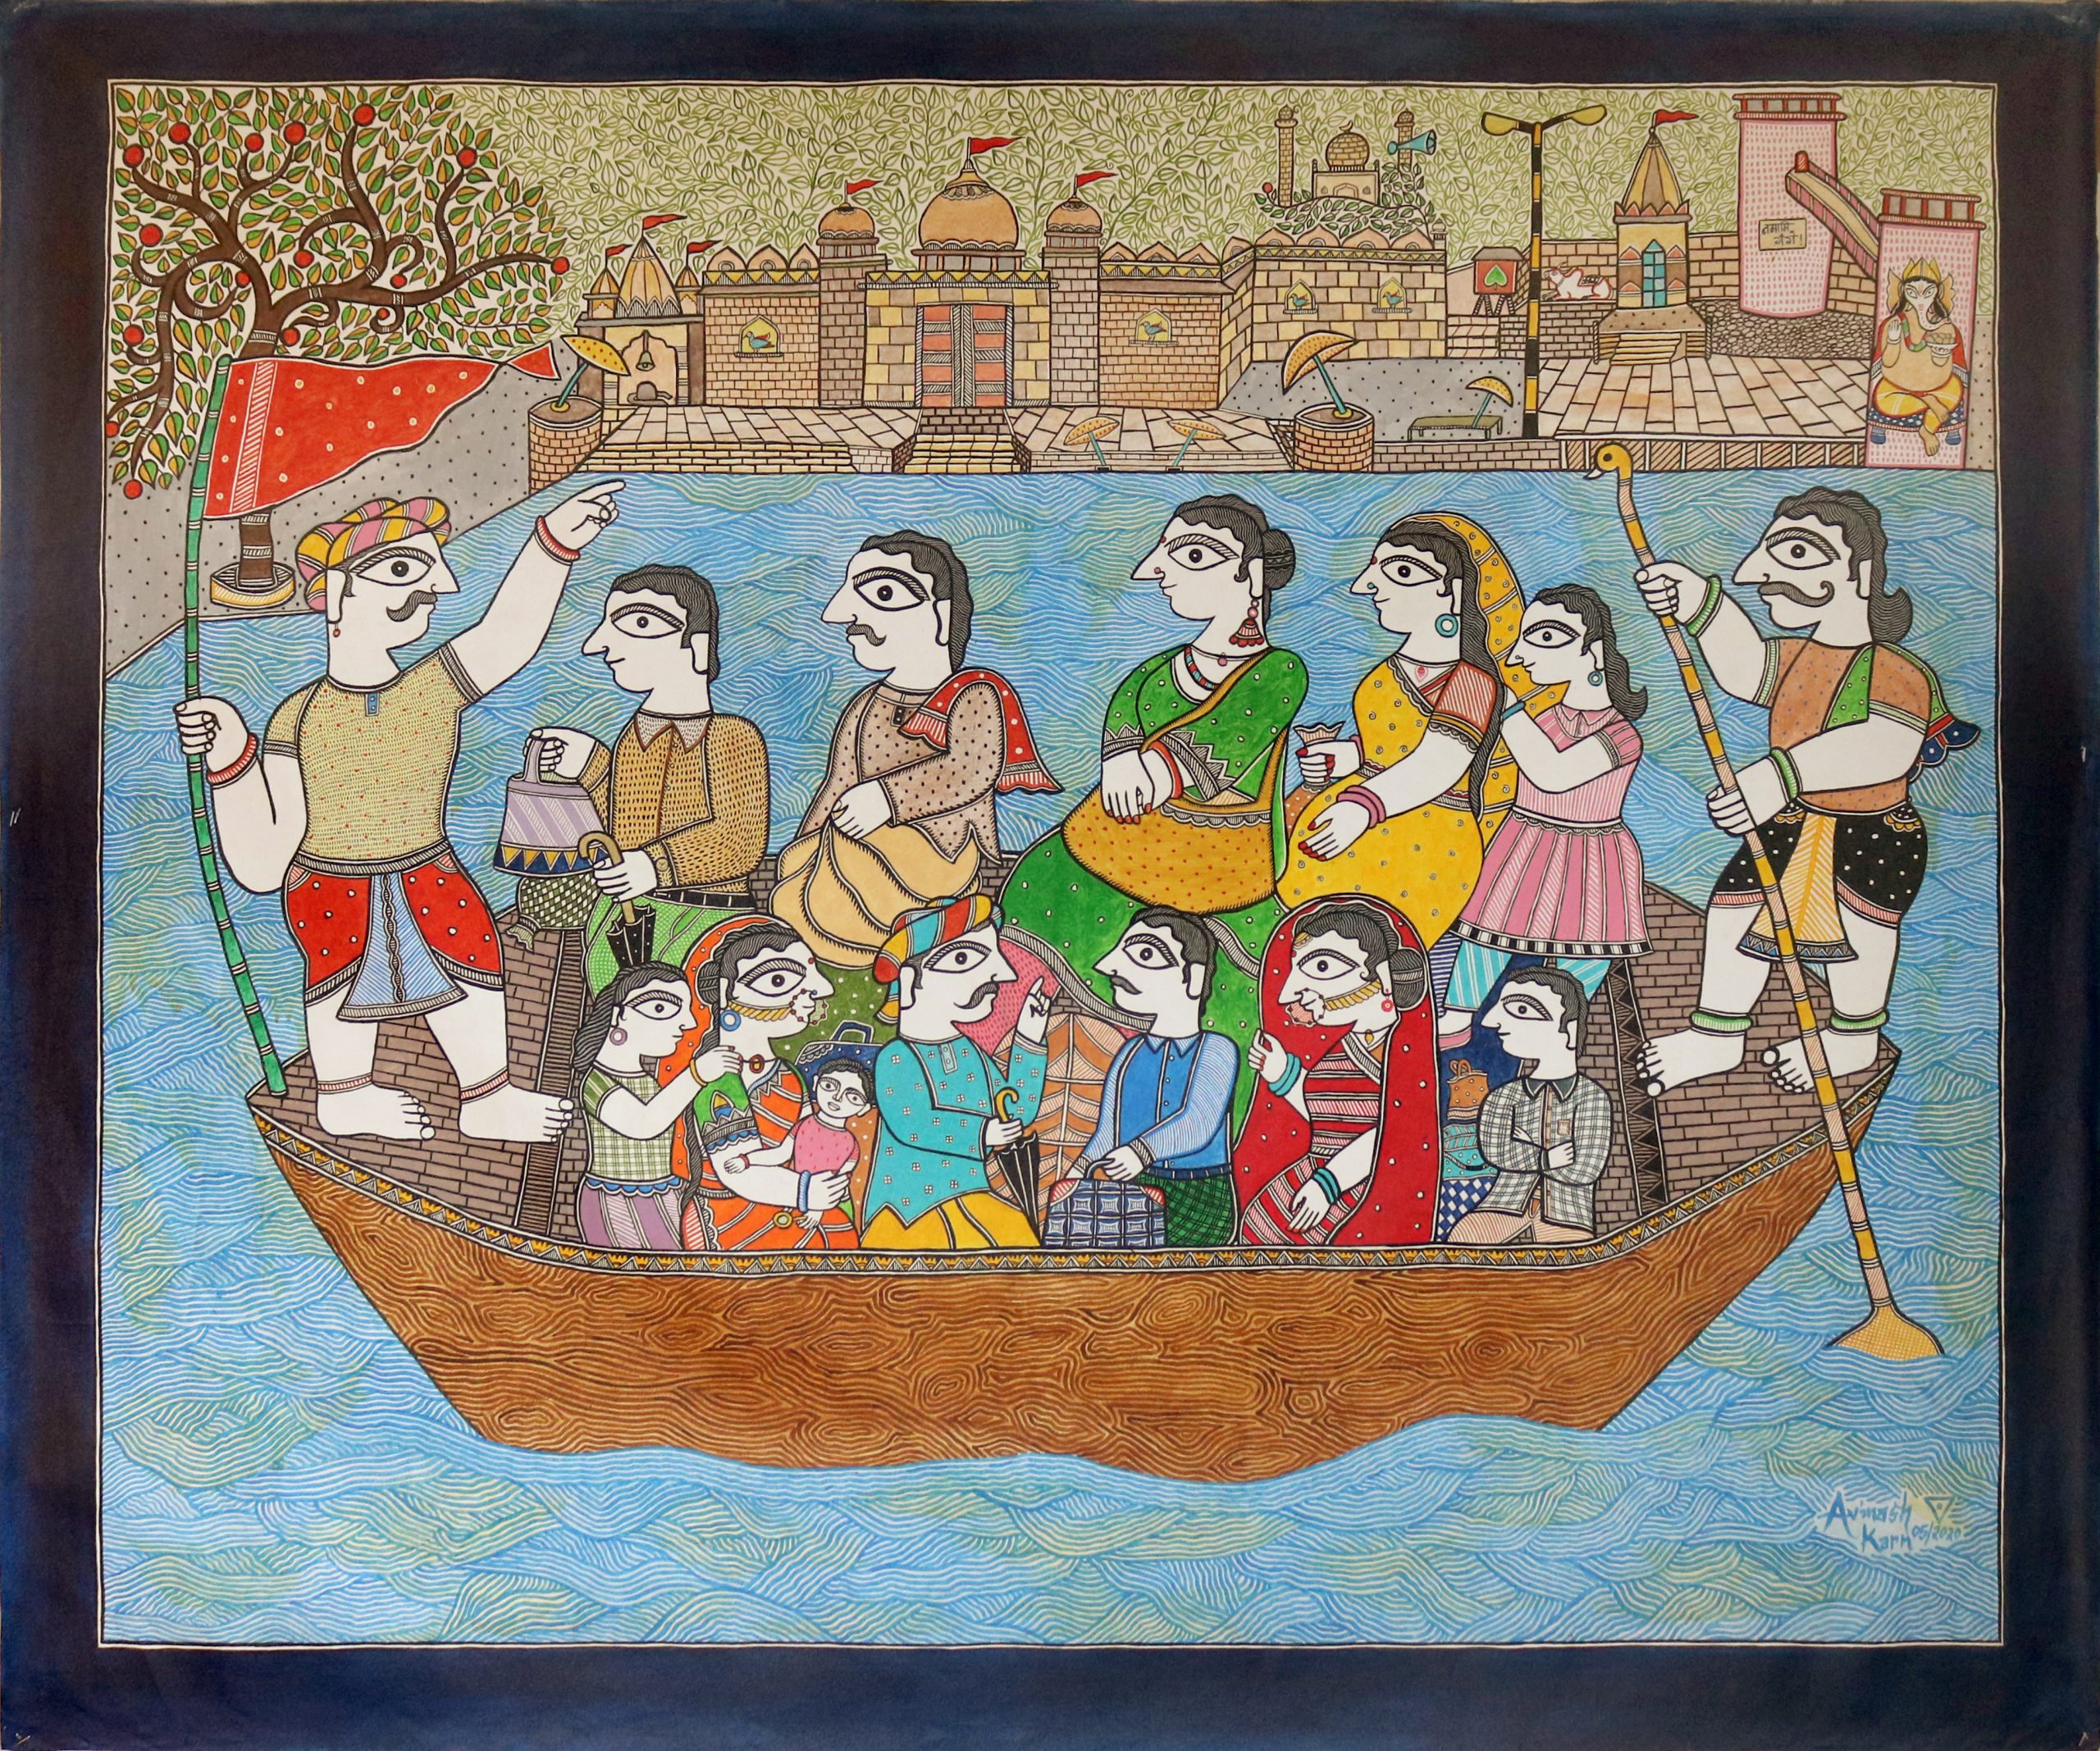 Brown boat on water against a fort or palace. A man with a flag (l), a man with an oar (r) and 12 passengers. There are 3 women and 4 men, one baby and three children.